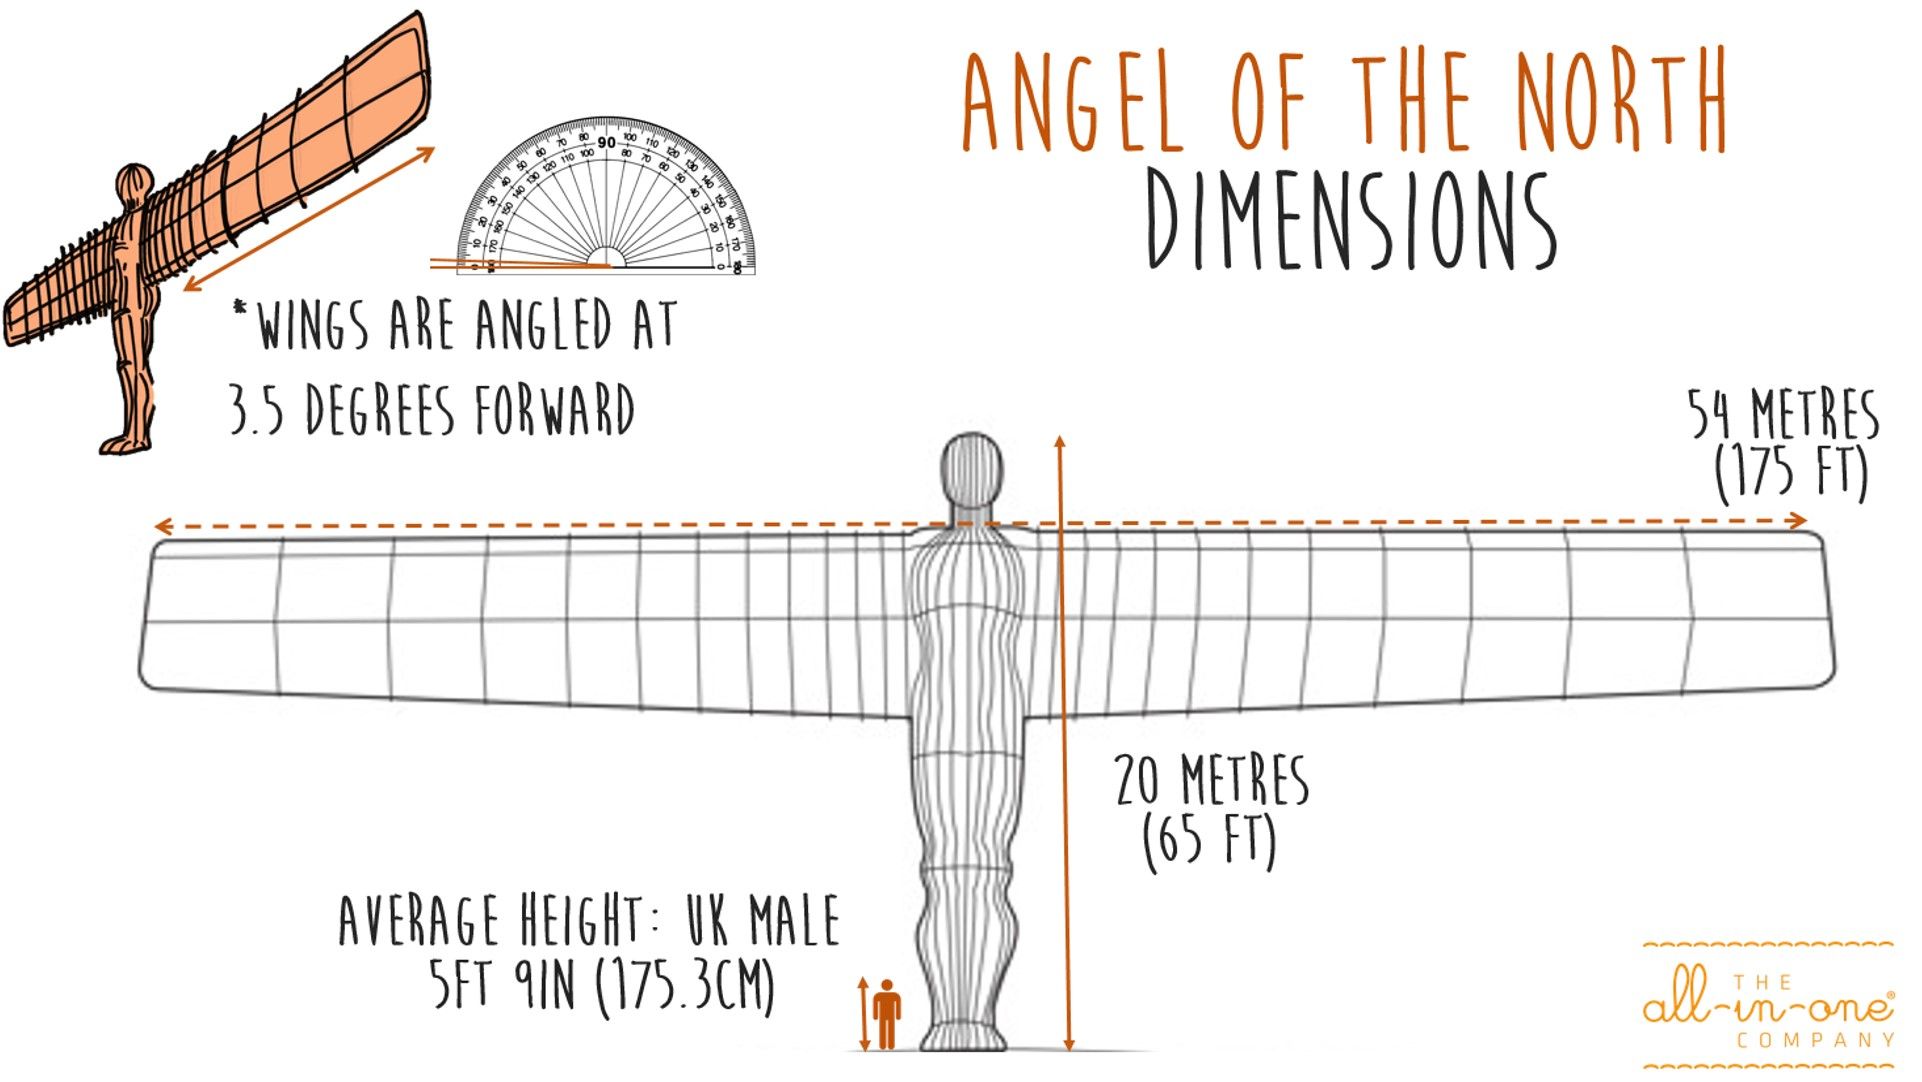 Angel of the North Dimensions